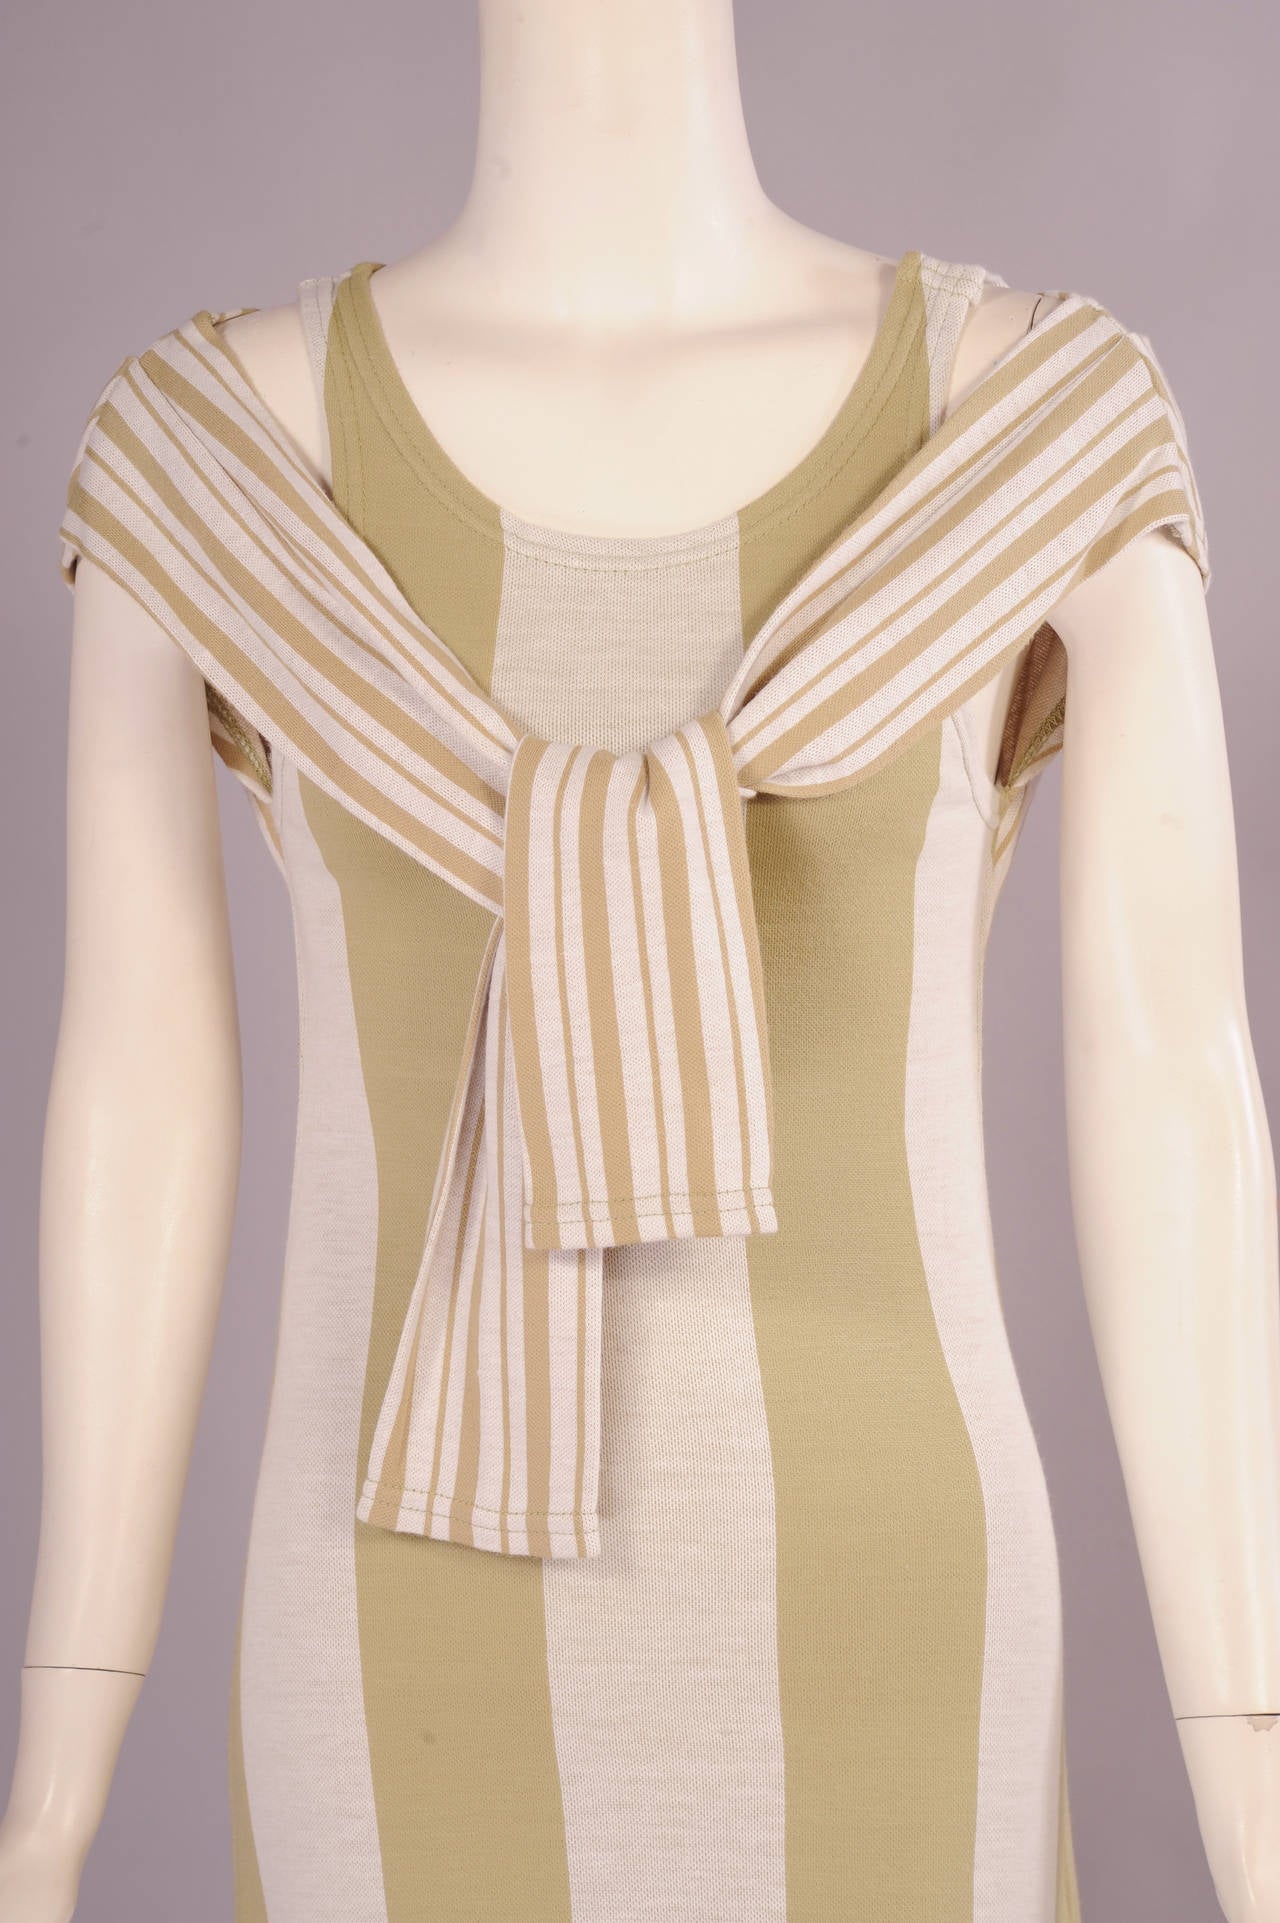 Rudi Gernreich designed this dress for Harmon Knitwear in the 1960's and it is a very modern and clever design. The tank dress is made from a wide vertical striped fabric and it slips on over your head. There are snaps on the left shoulder of the